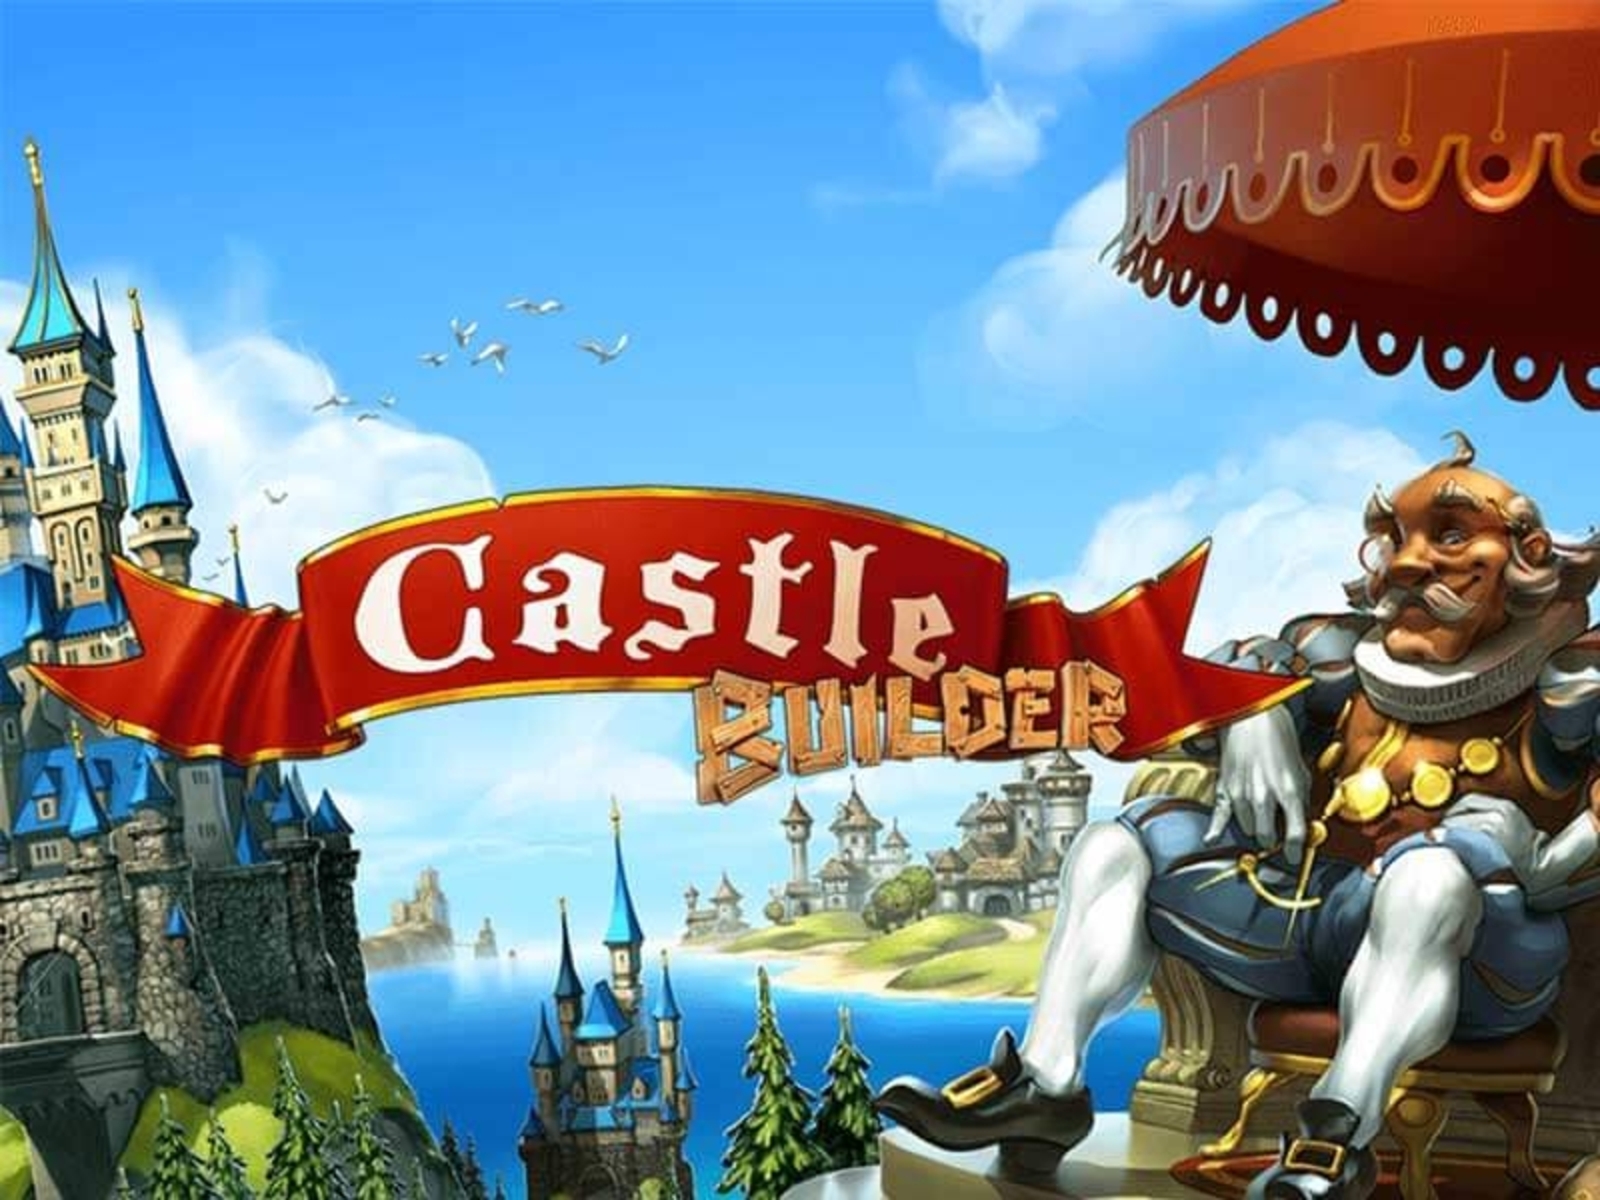 The Castle Builder Online Slot Demo Game by Rabcat